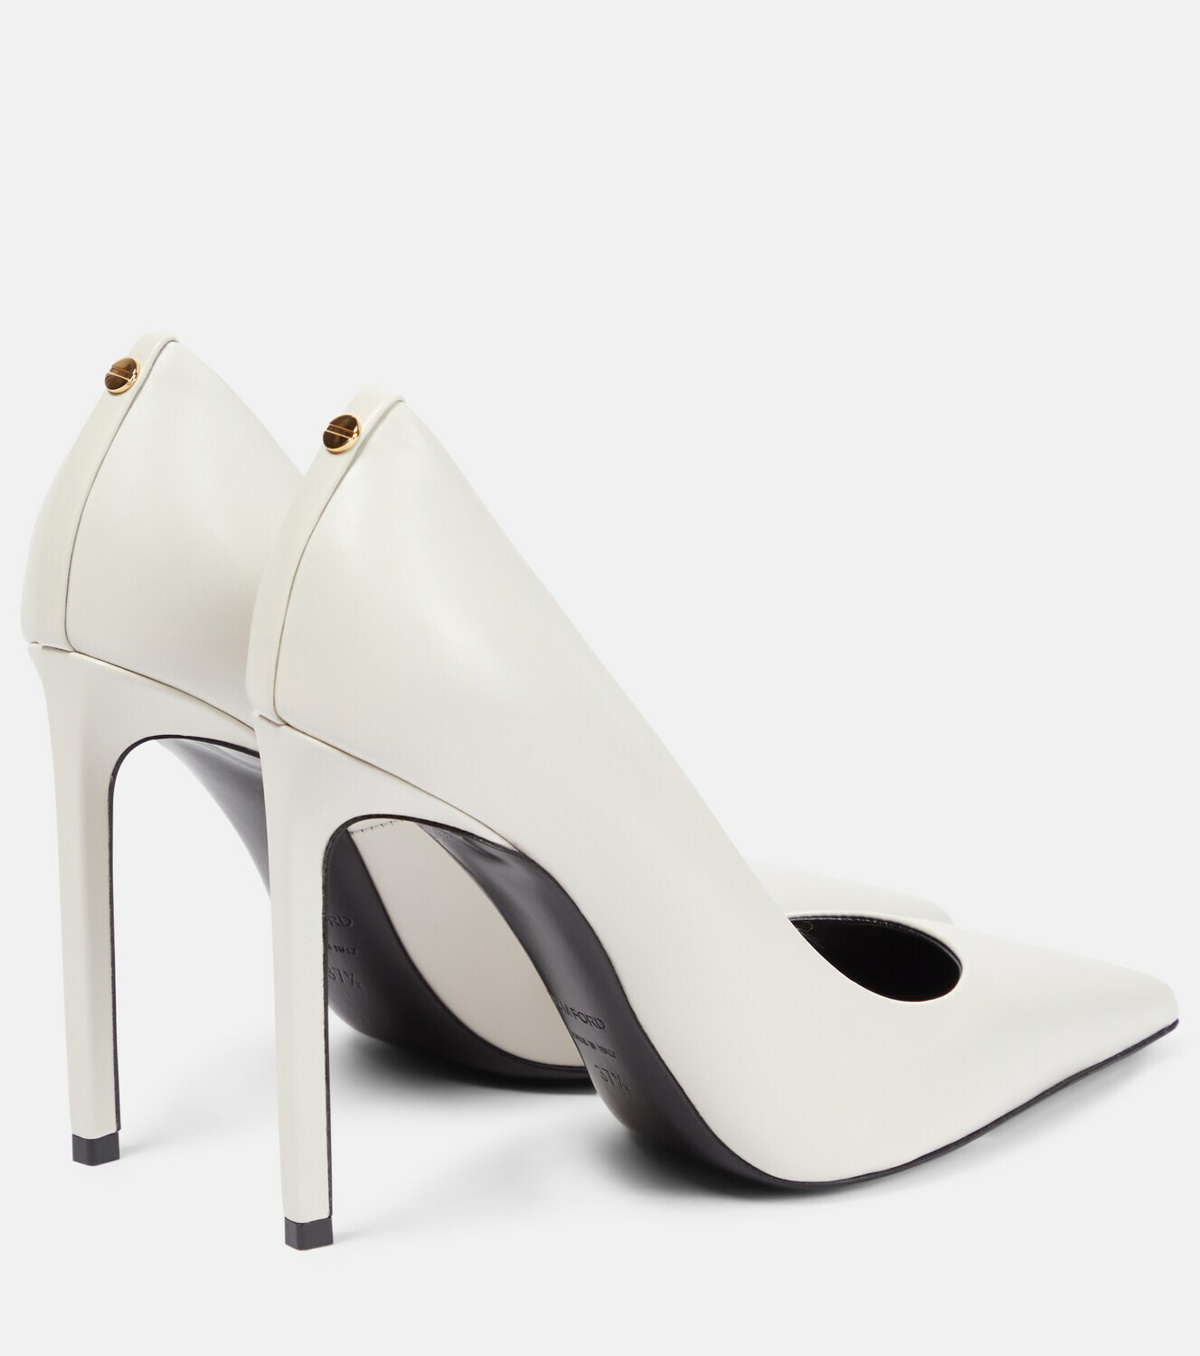 T Screw 105 leather pumps in black - Tom Ford